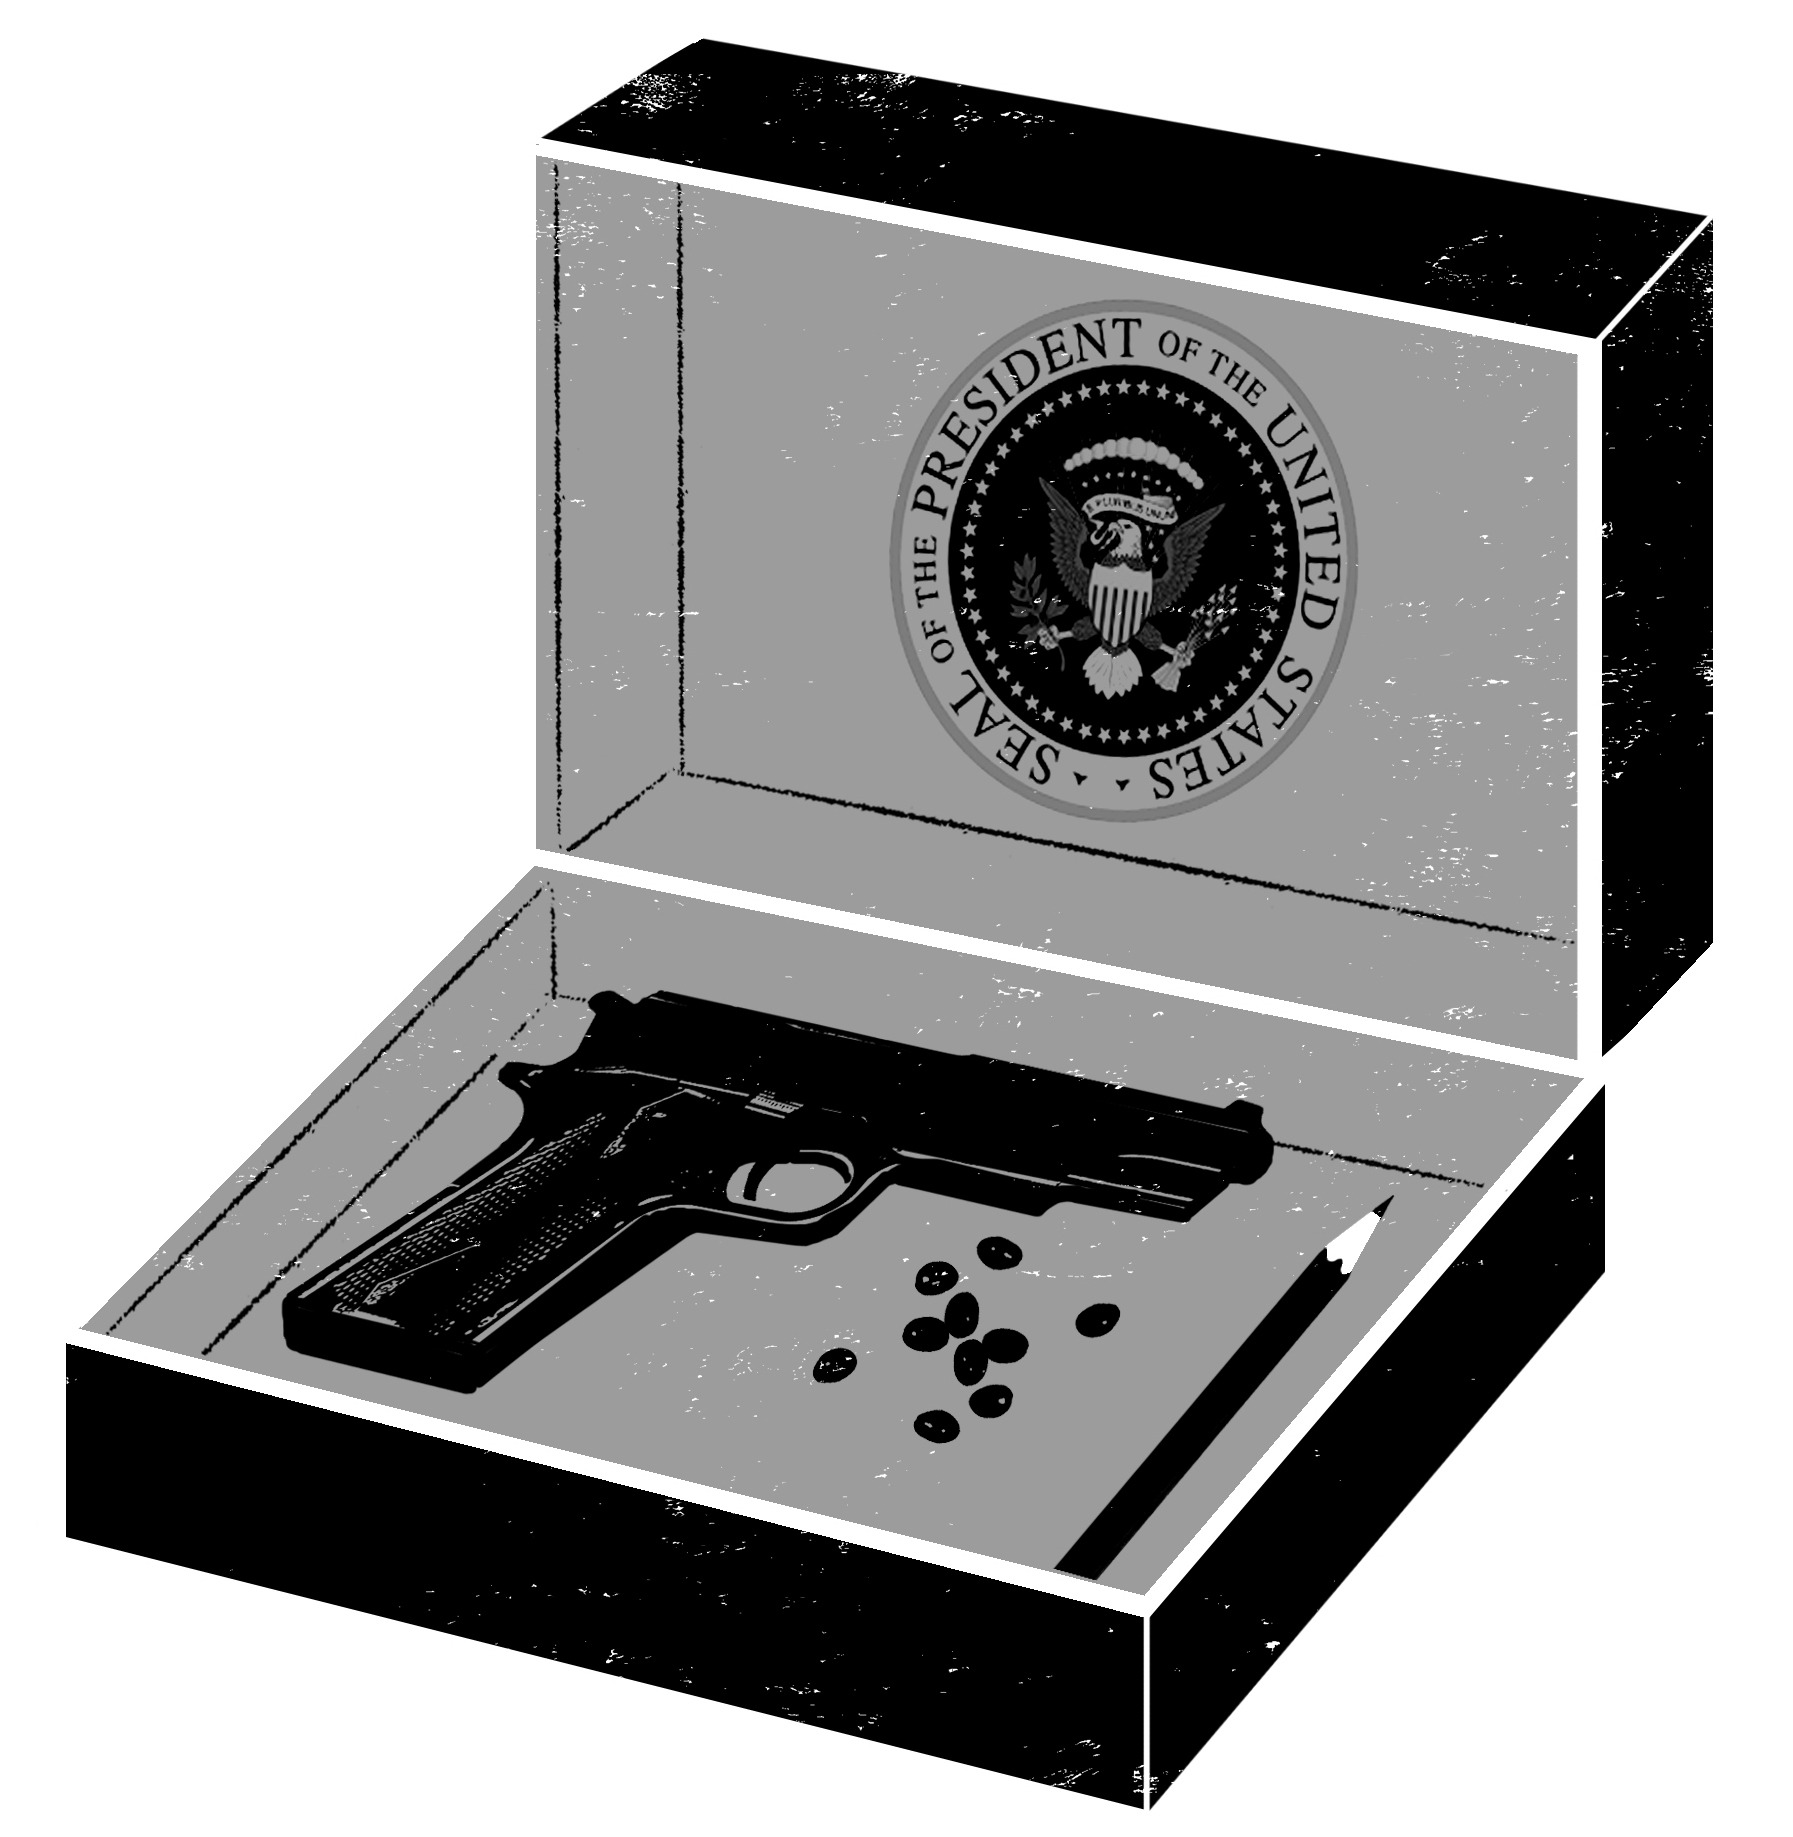 Reagan’s Pistol and the Myth of a Good Guy with a Gun